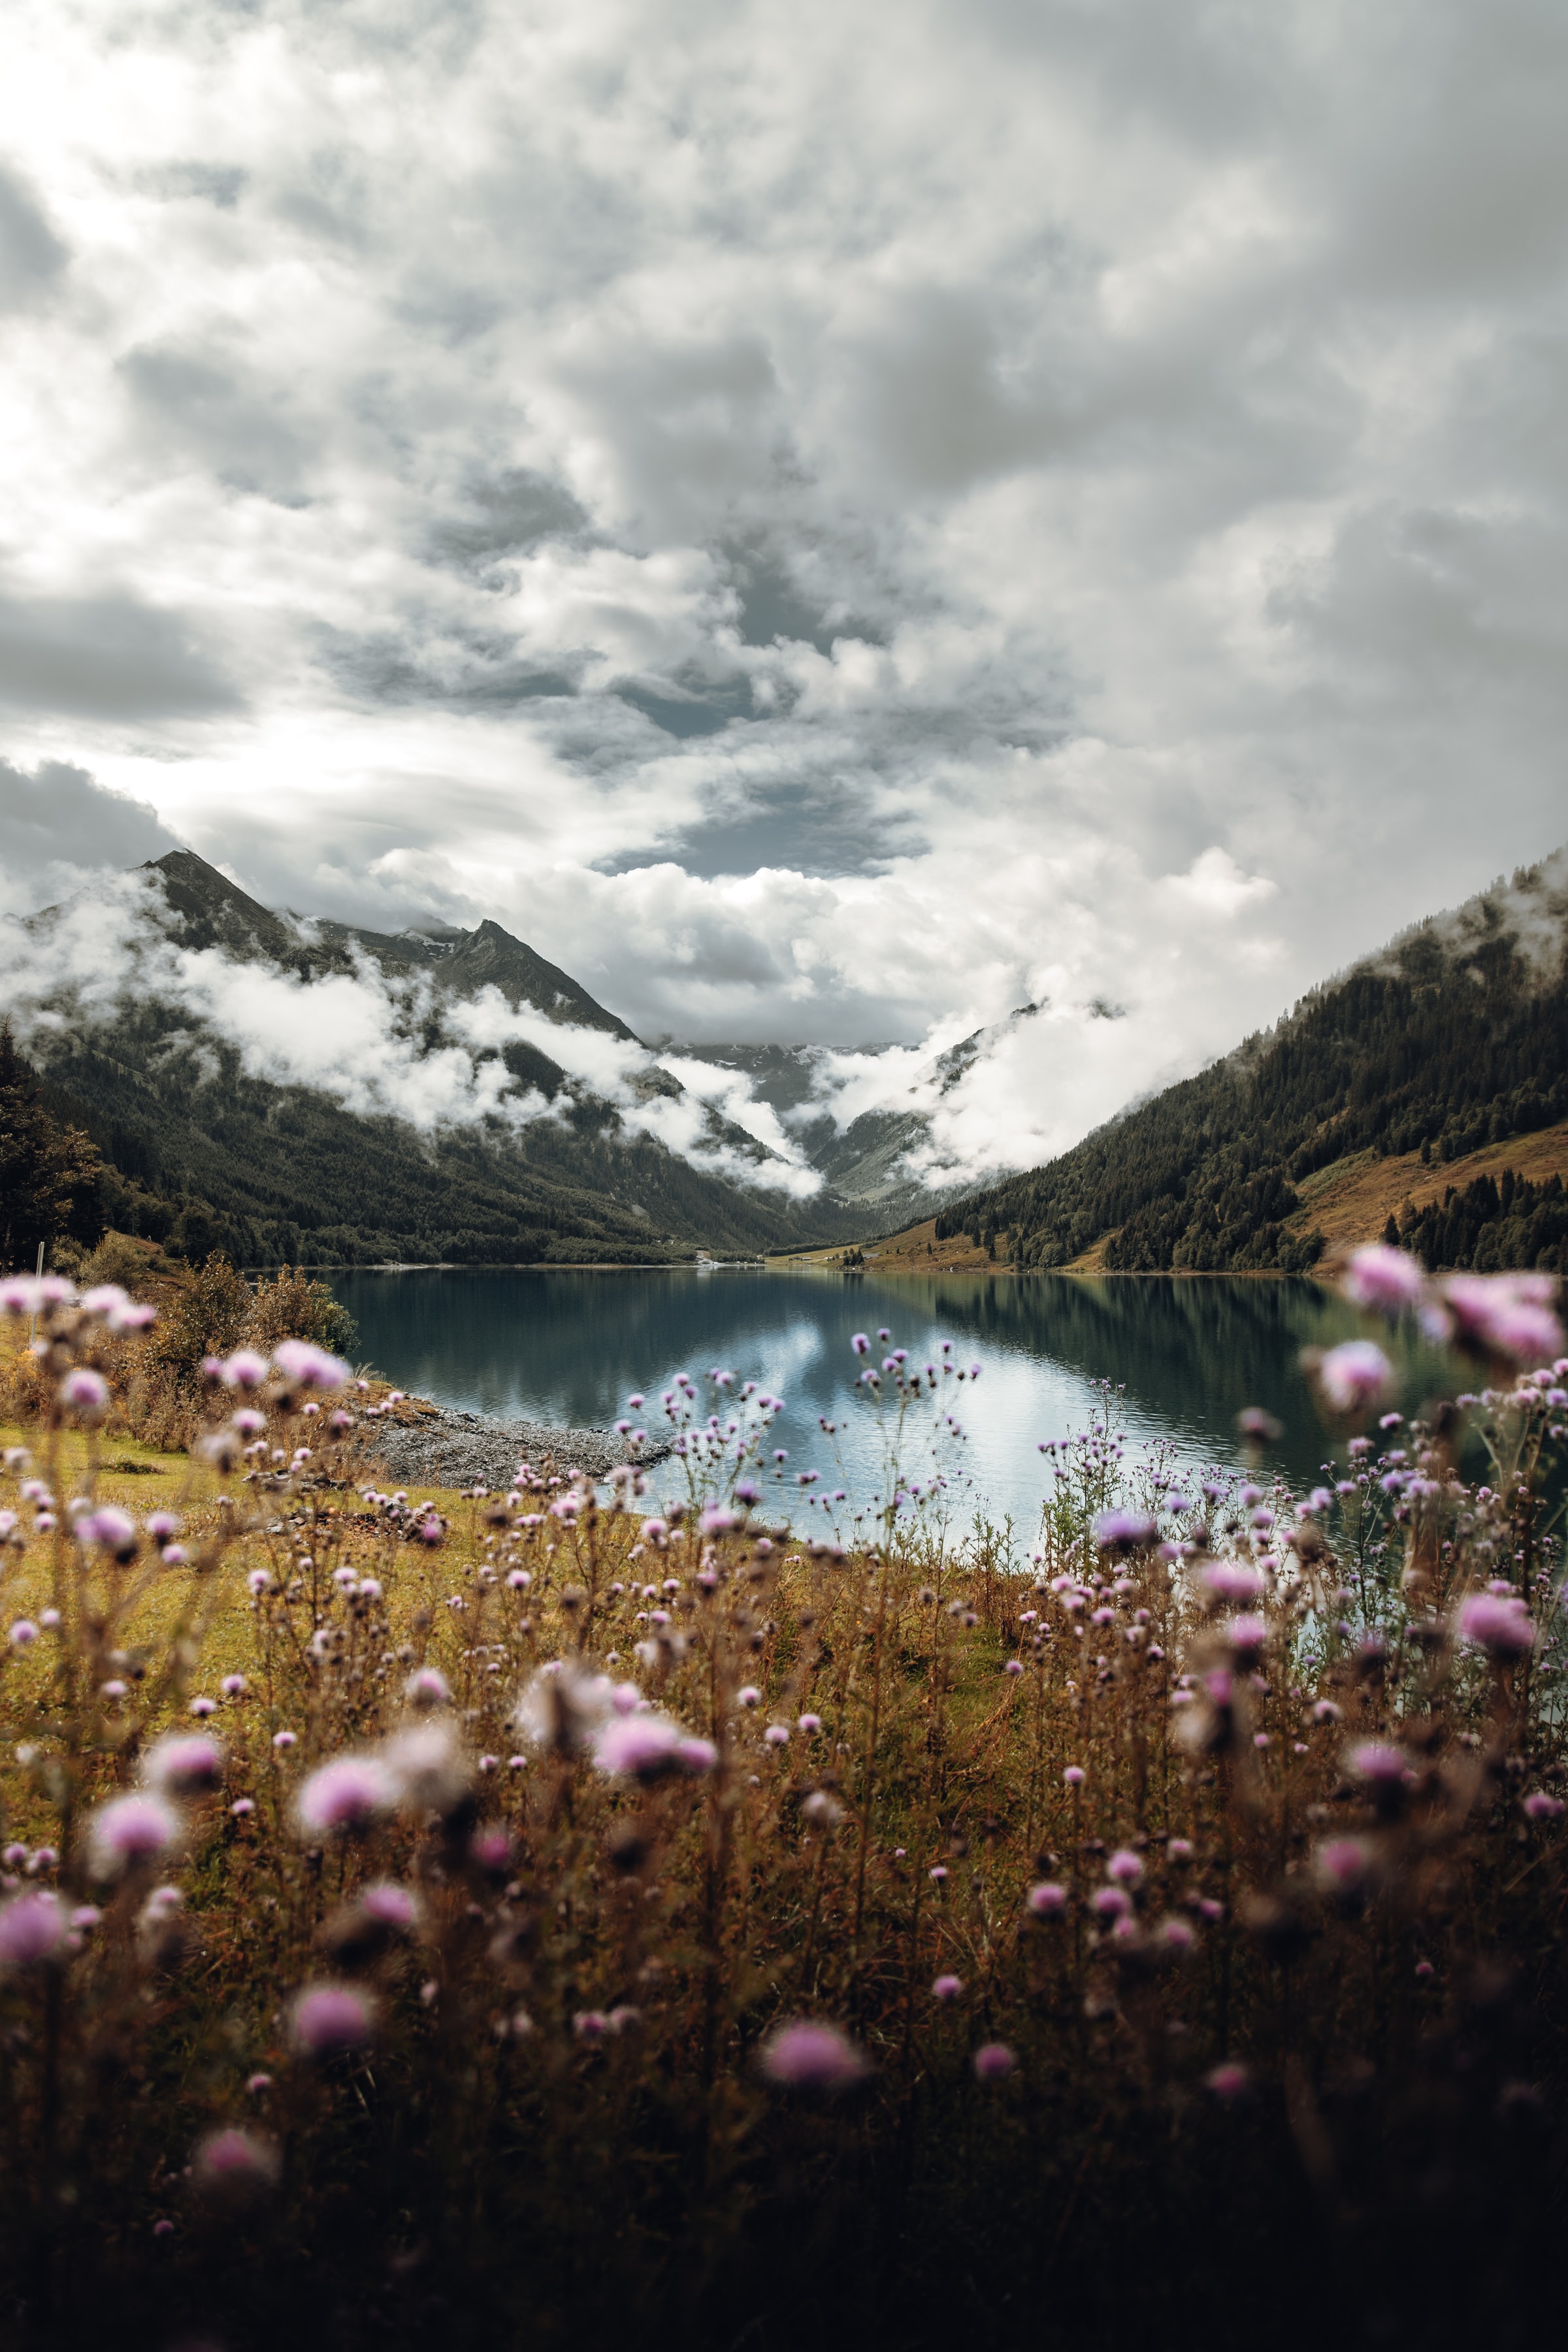 wildflowers, mountains, nature, sky, clouds, lake